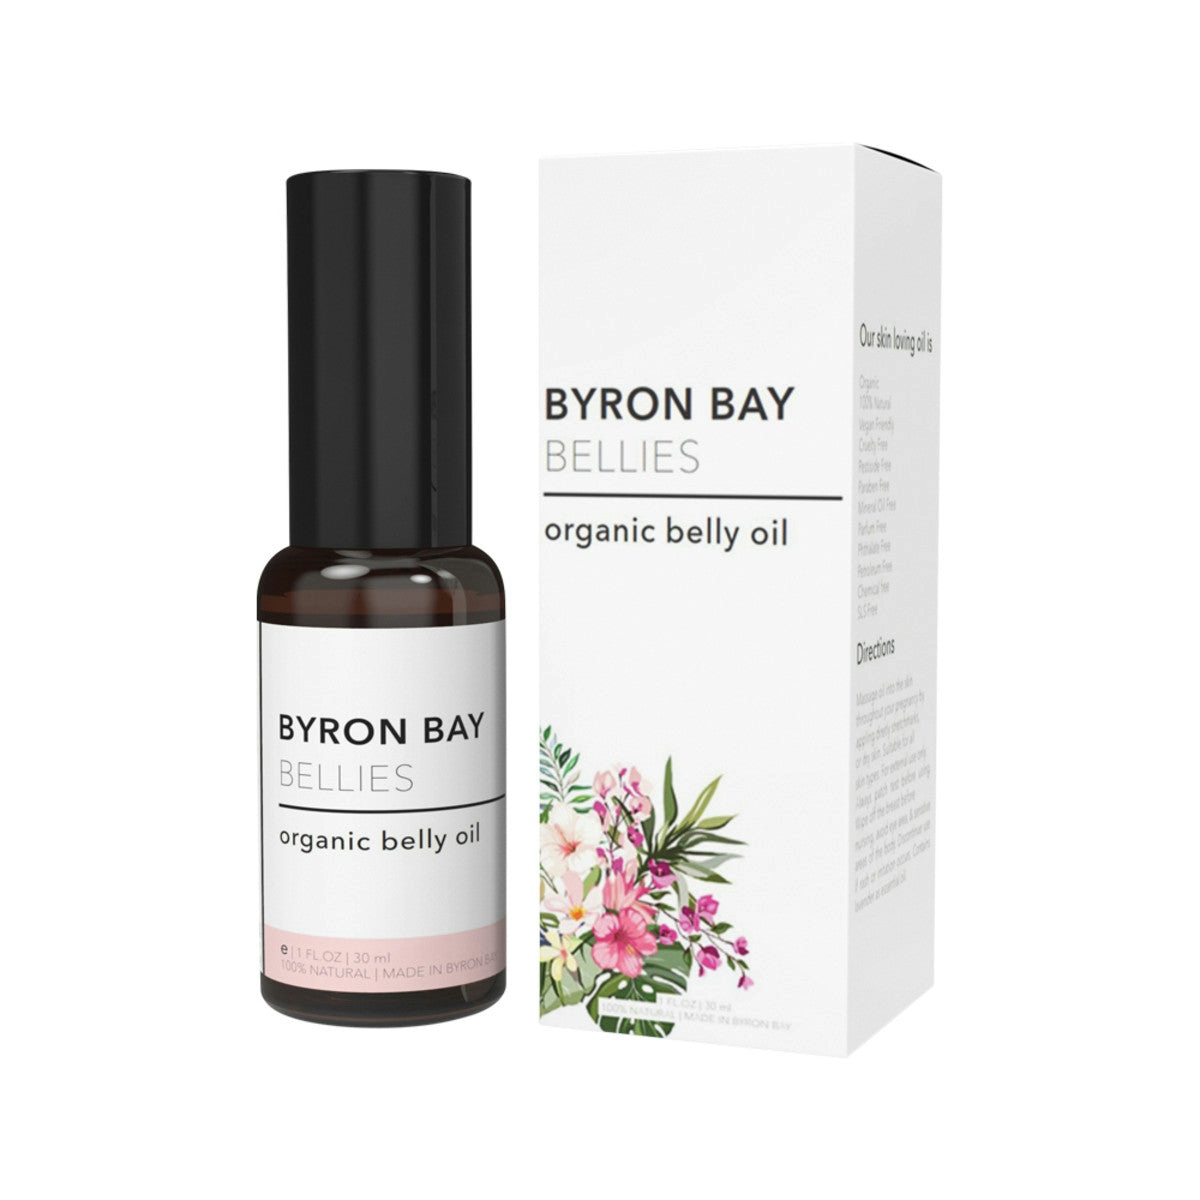 image of Byron Bay Bellies Organic Belly Oil 30ml on white background 